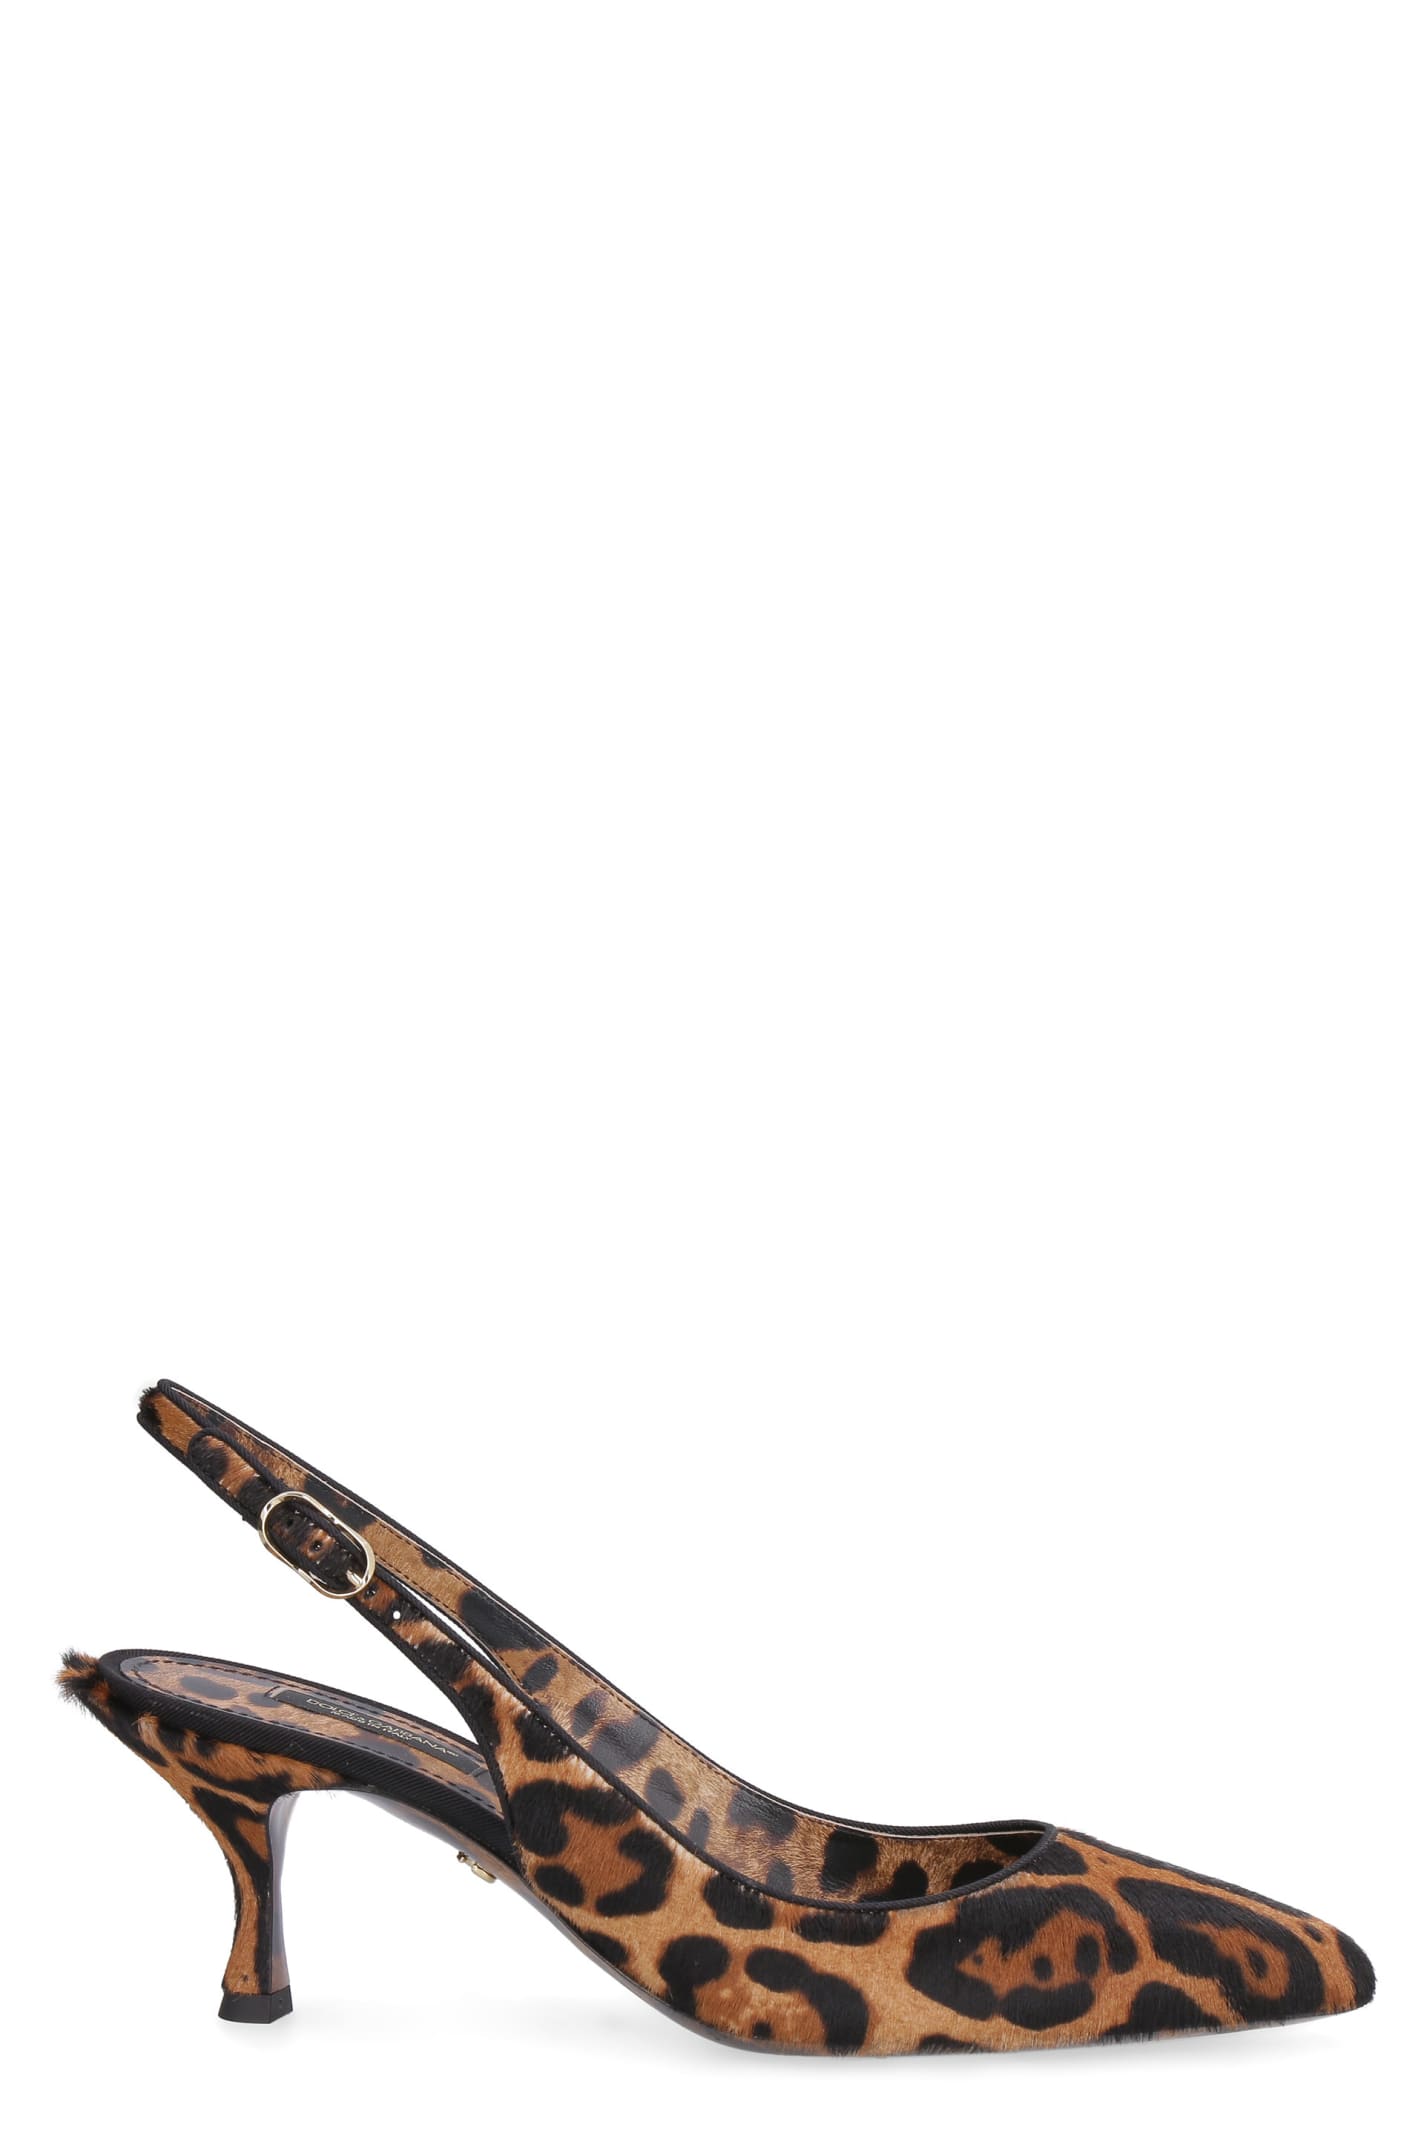 Buy Dolce & Gabbana Calfhair Pointy-toe Slingback online, shop Dolce & Gabbana shoes with free shipping